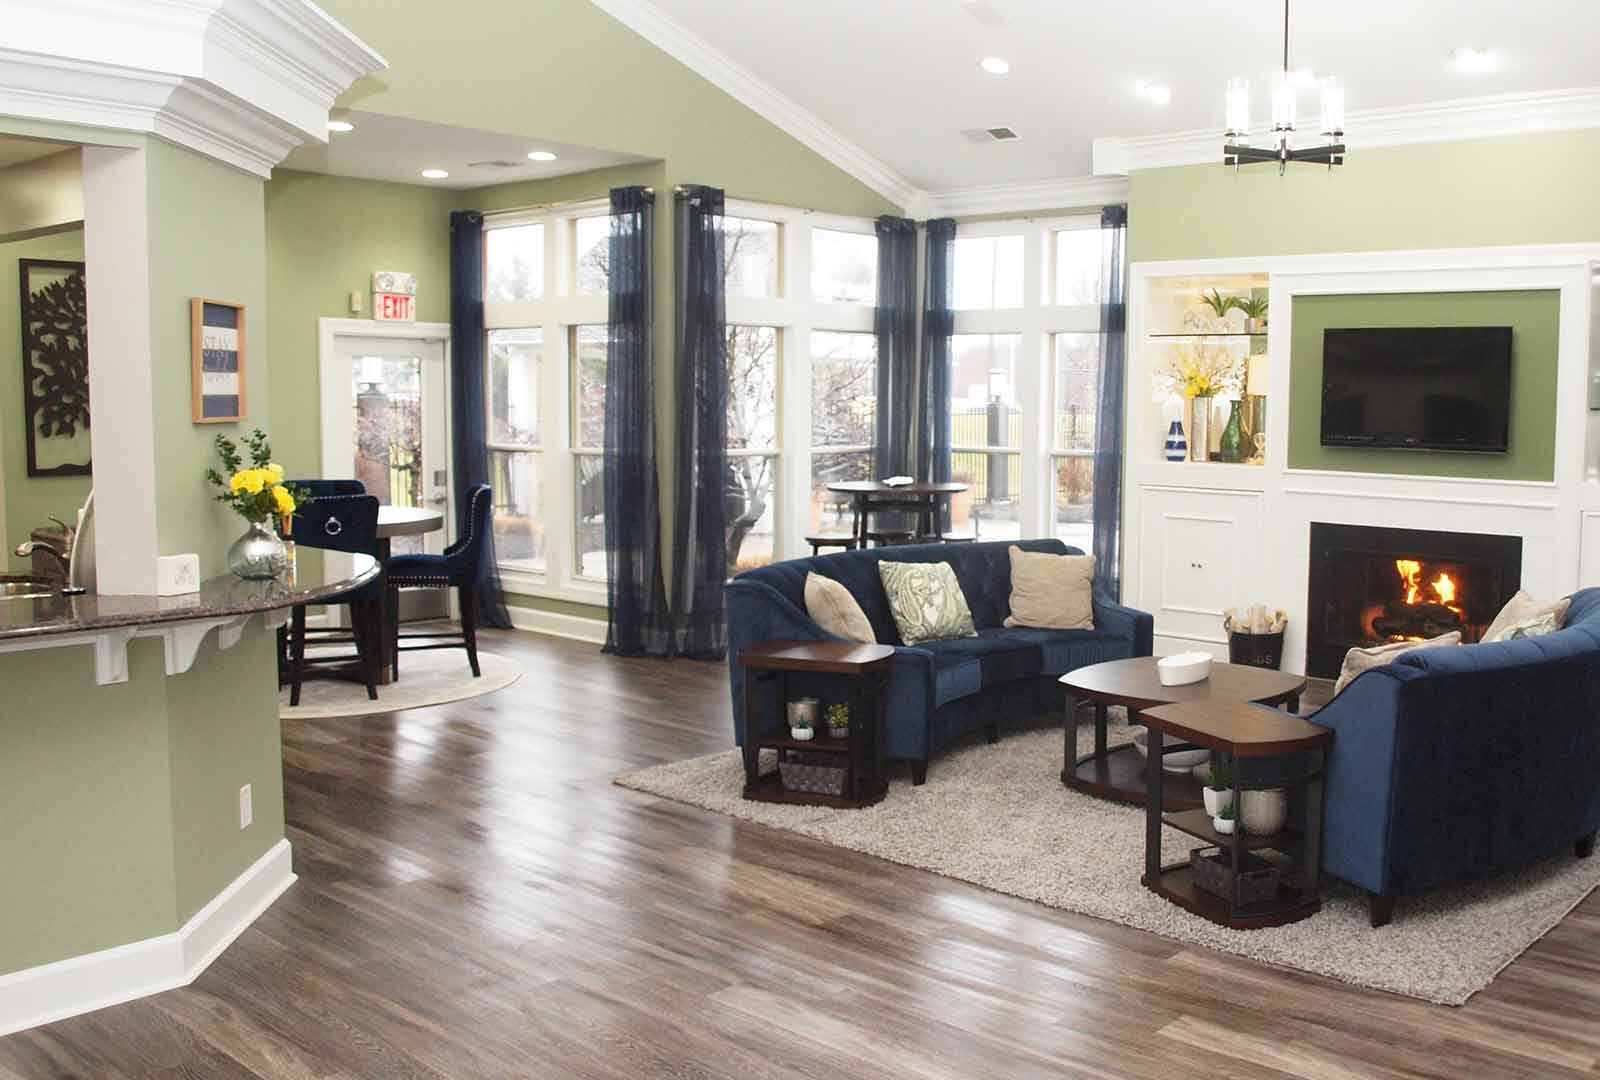 Decorated clubhouse lounge area with fireplace at Waterford Place.